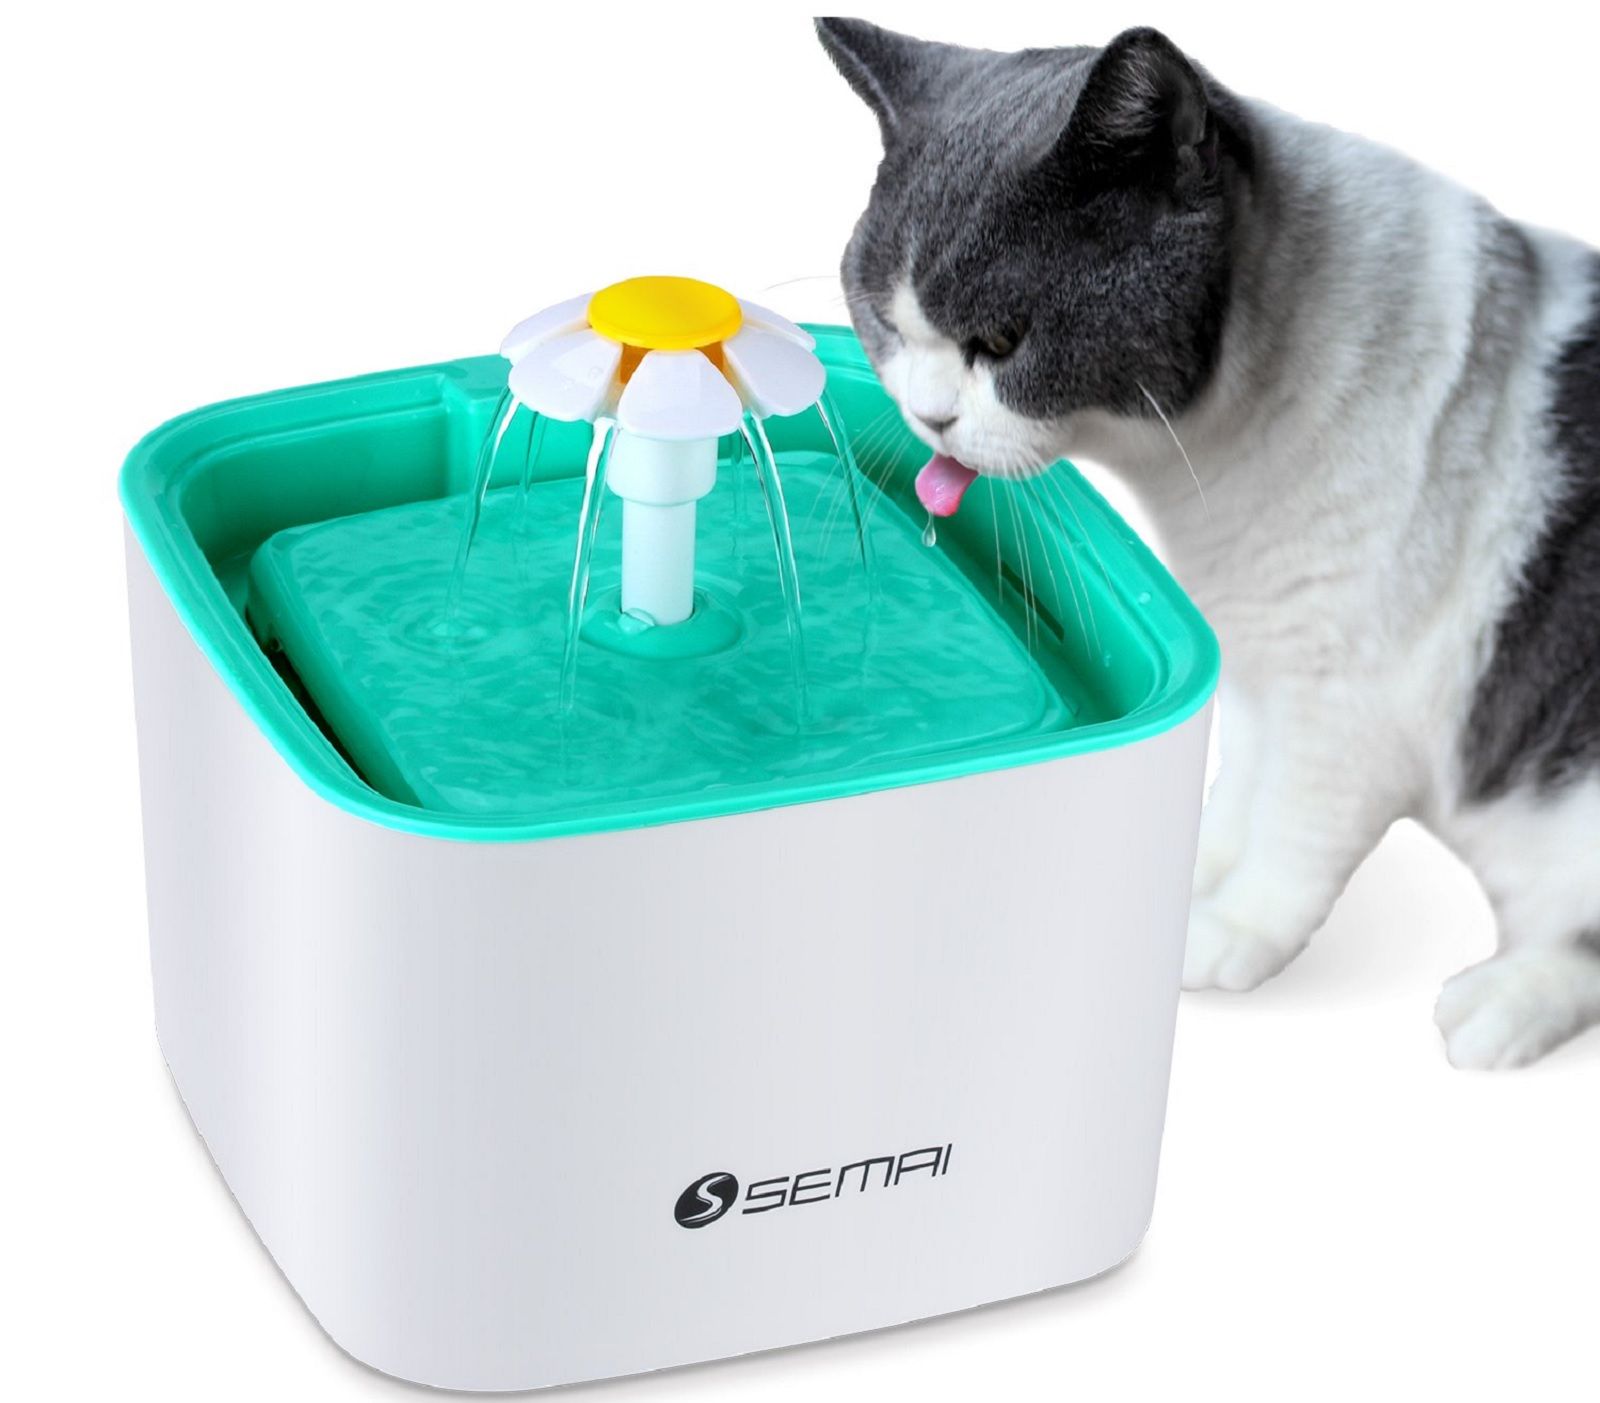 Amazing high-tech gadgets for your pets and yourself image 13